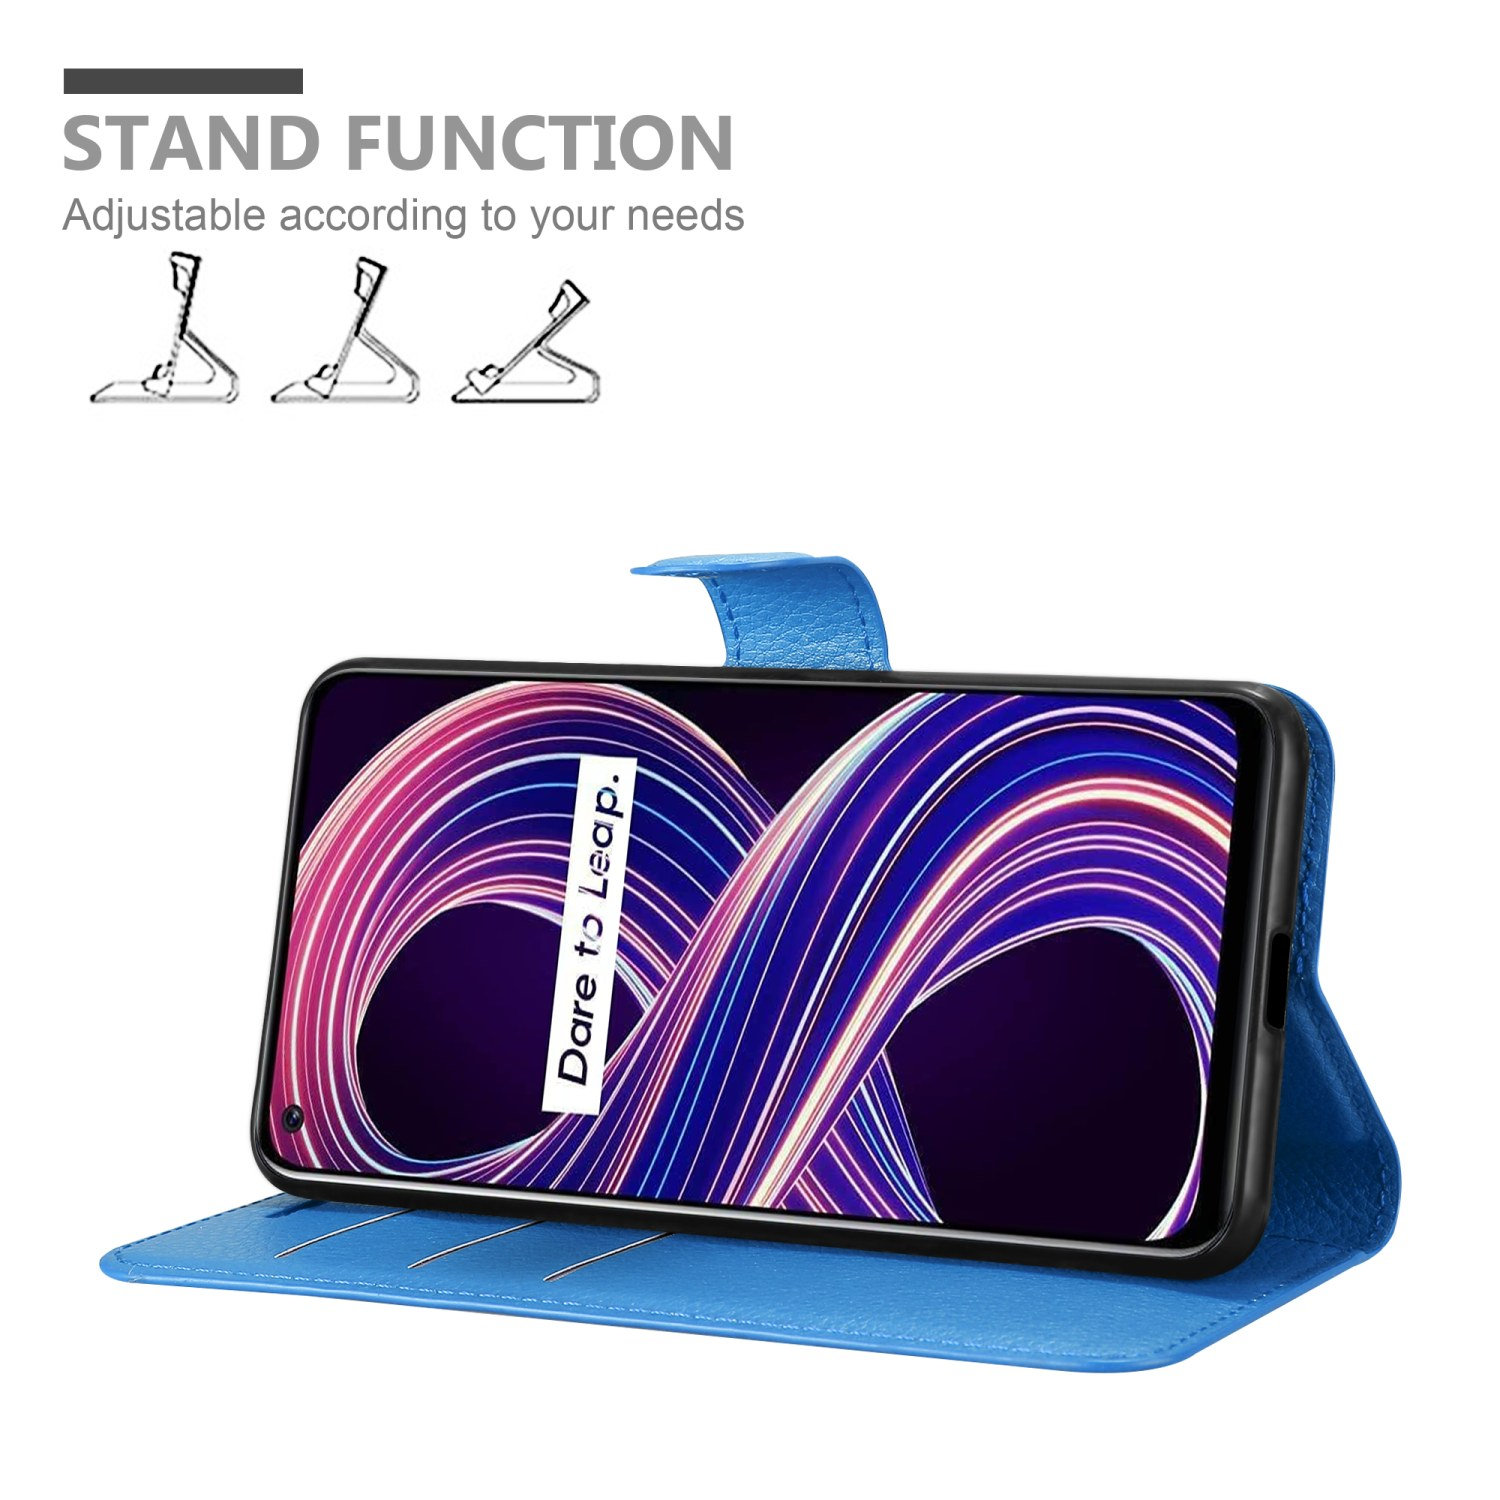 Bookcover, / 30 8 / / 5G, Q3i BLAU Q3 PASTELL Narzo V13 / Standfunktion, Hülle Book Realme, 5G CADORABO